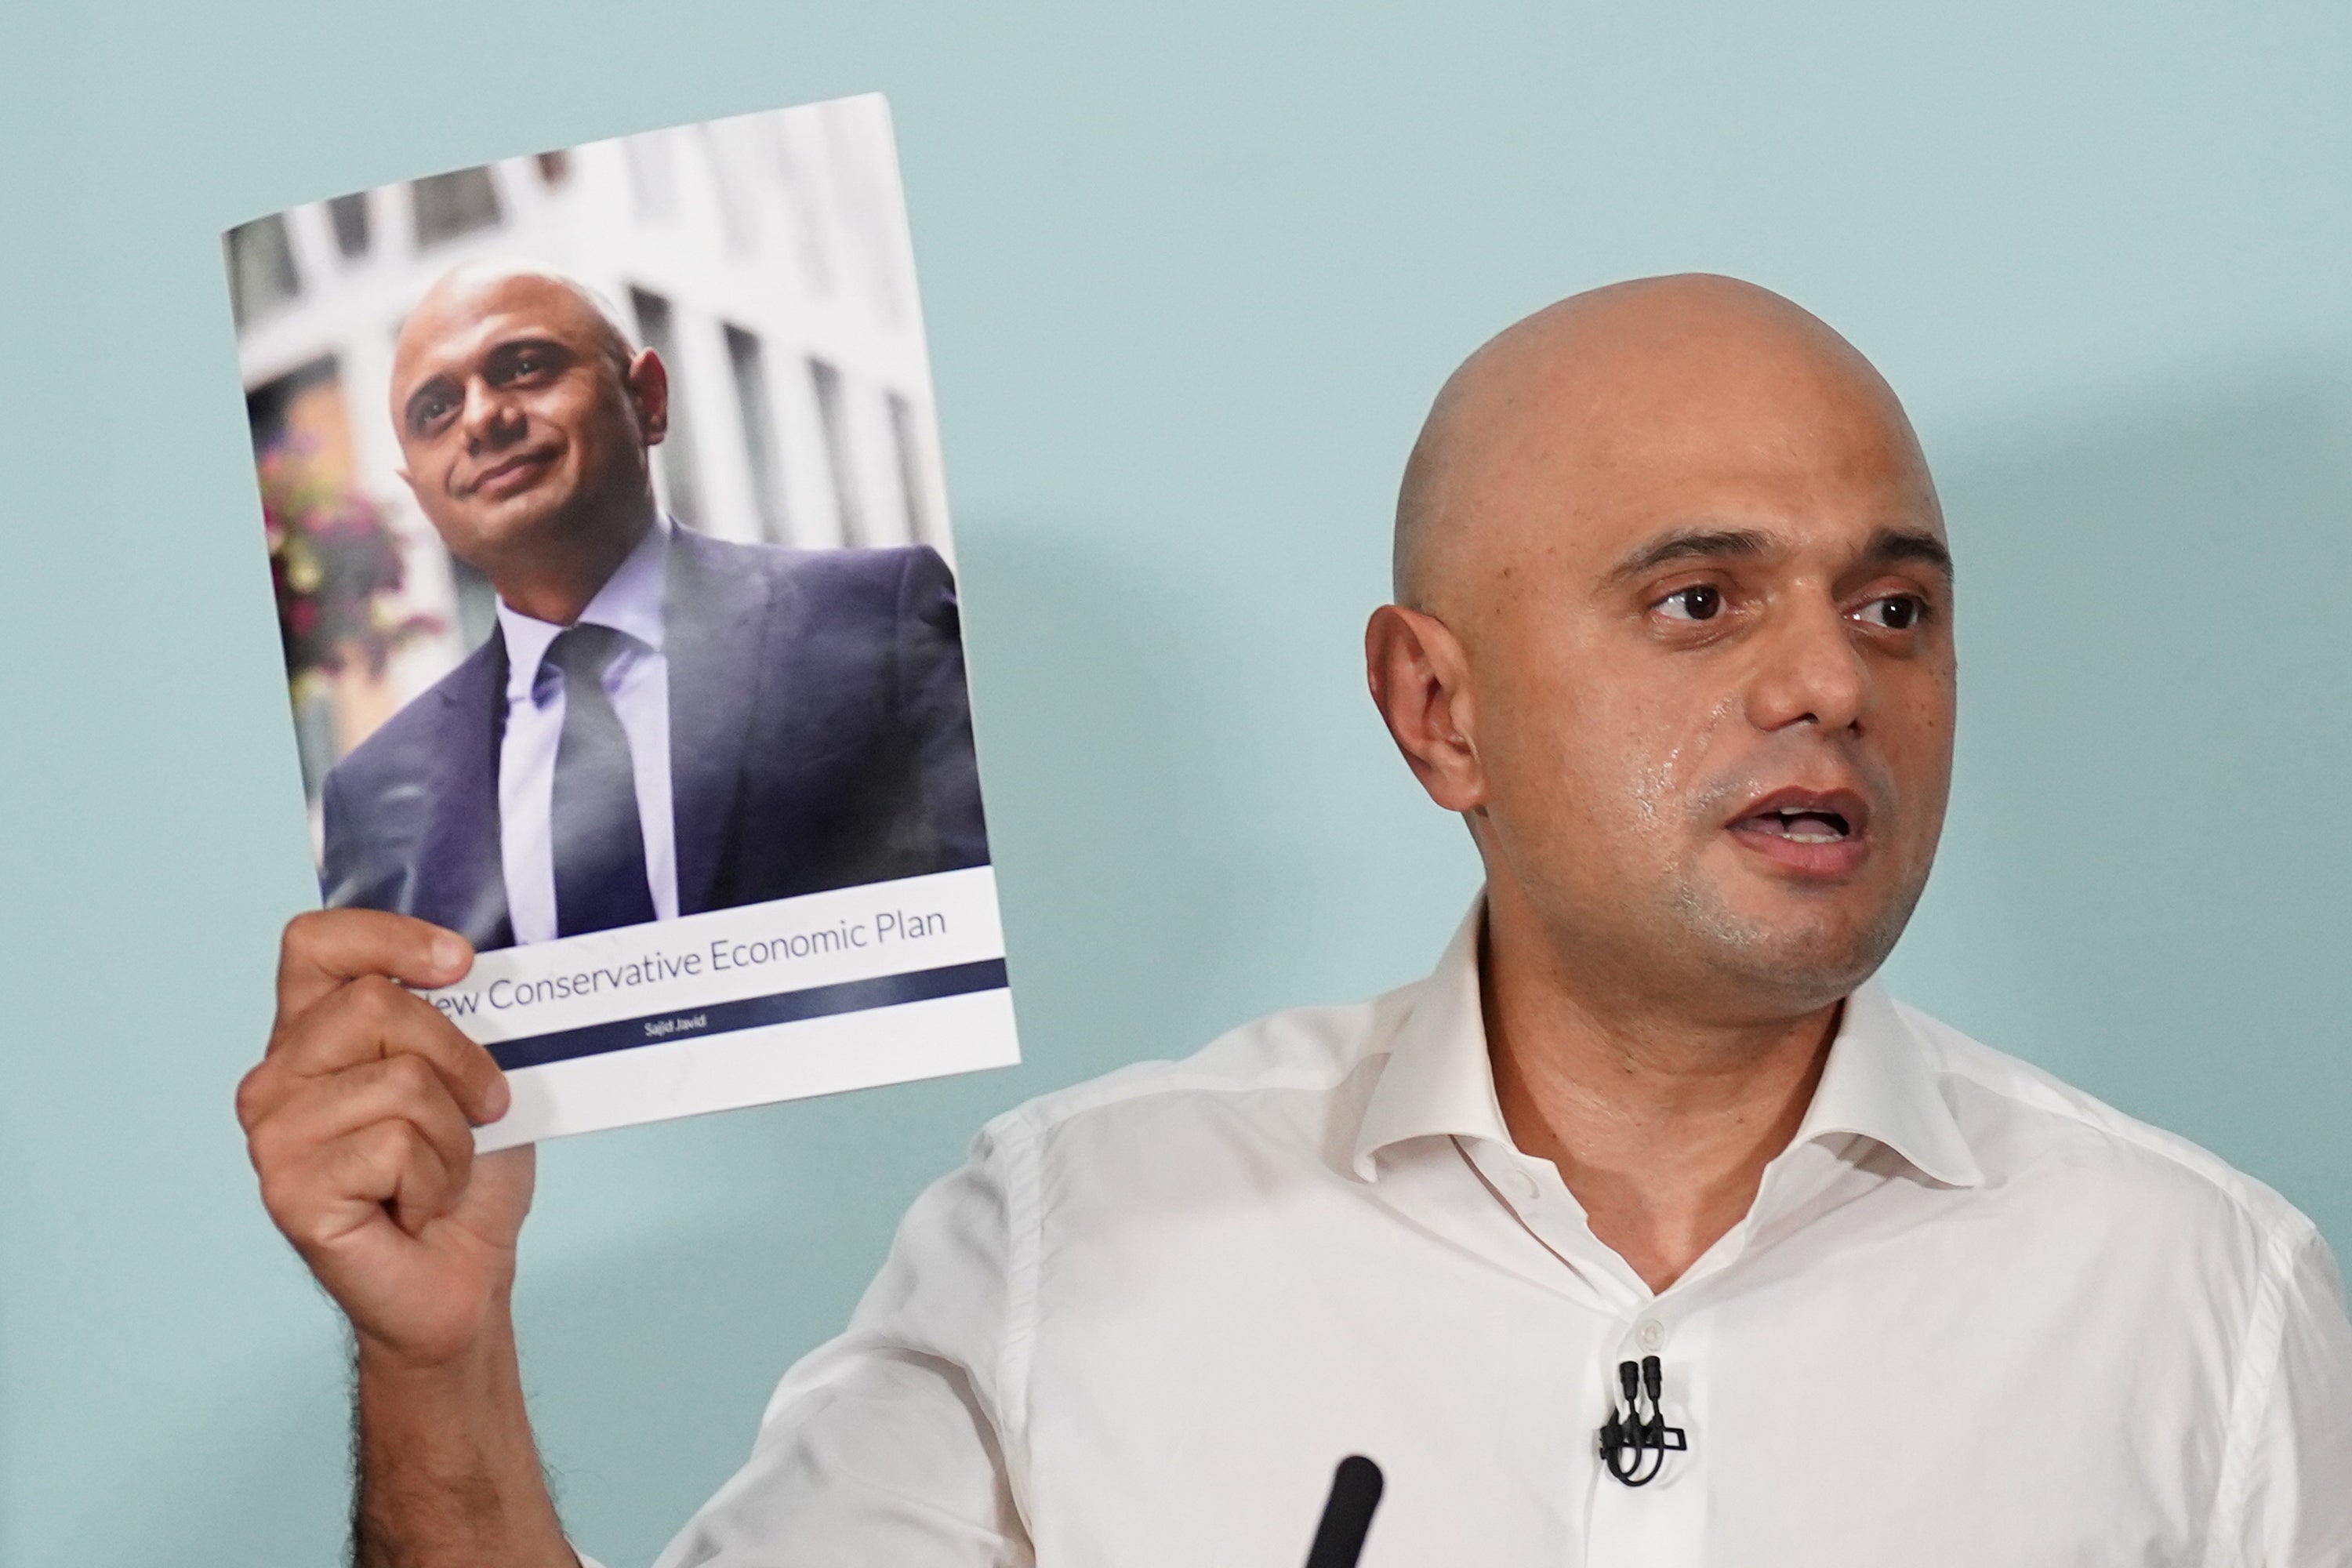 Sajid Javid speaks during the launch of his campaign to be Conservative Party leader and Prime Minister, at the Cinnamon Club in London (Stefan Rousseau/PA)